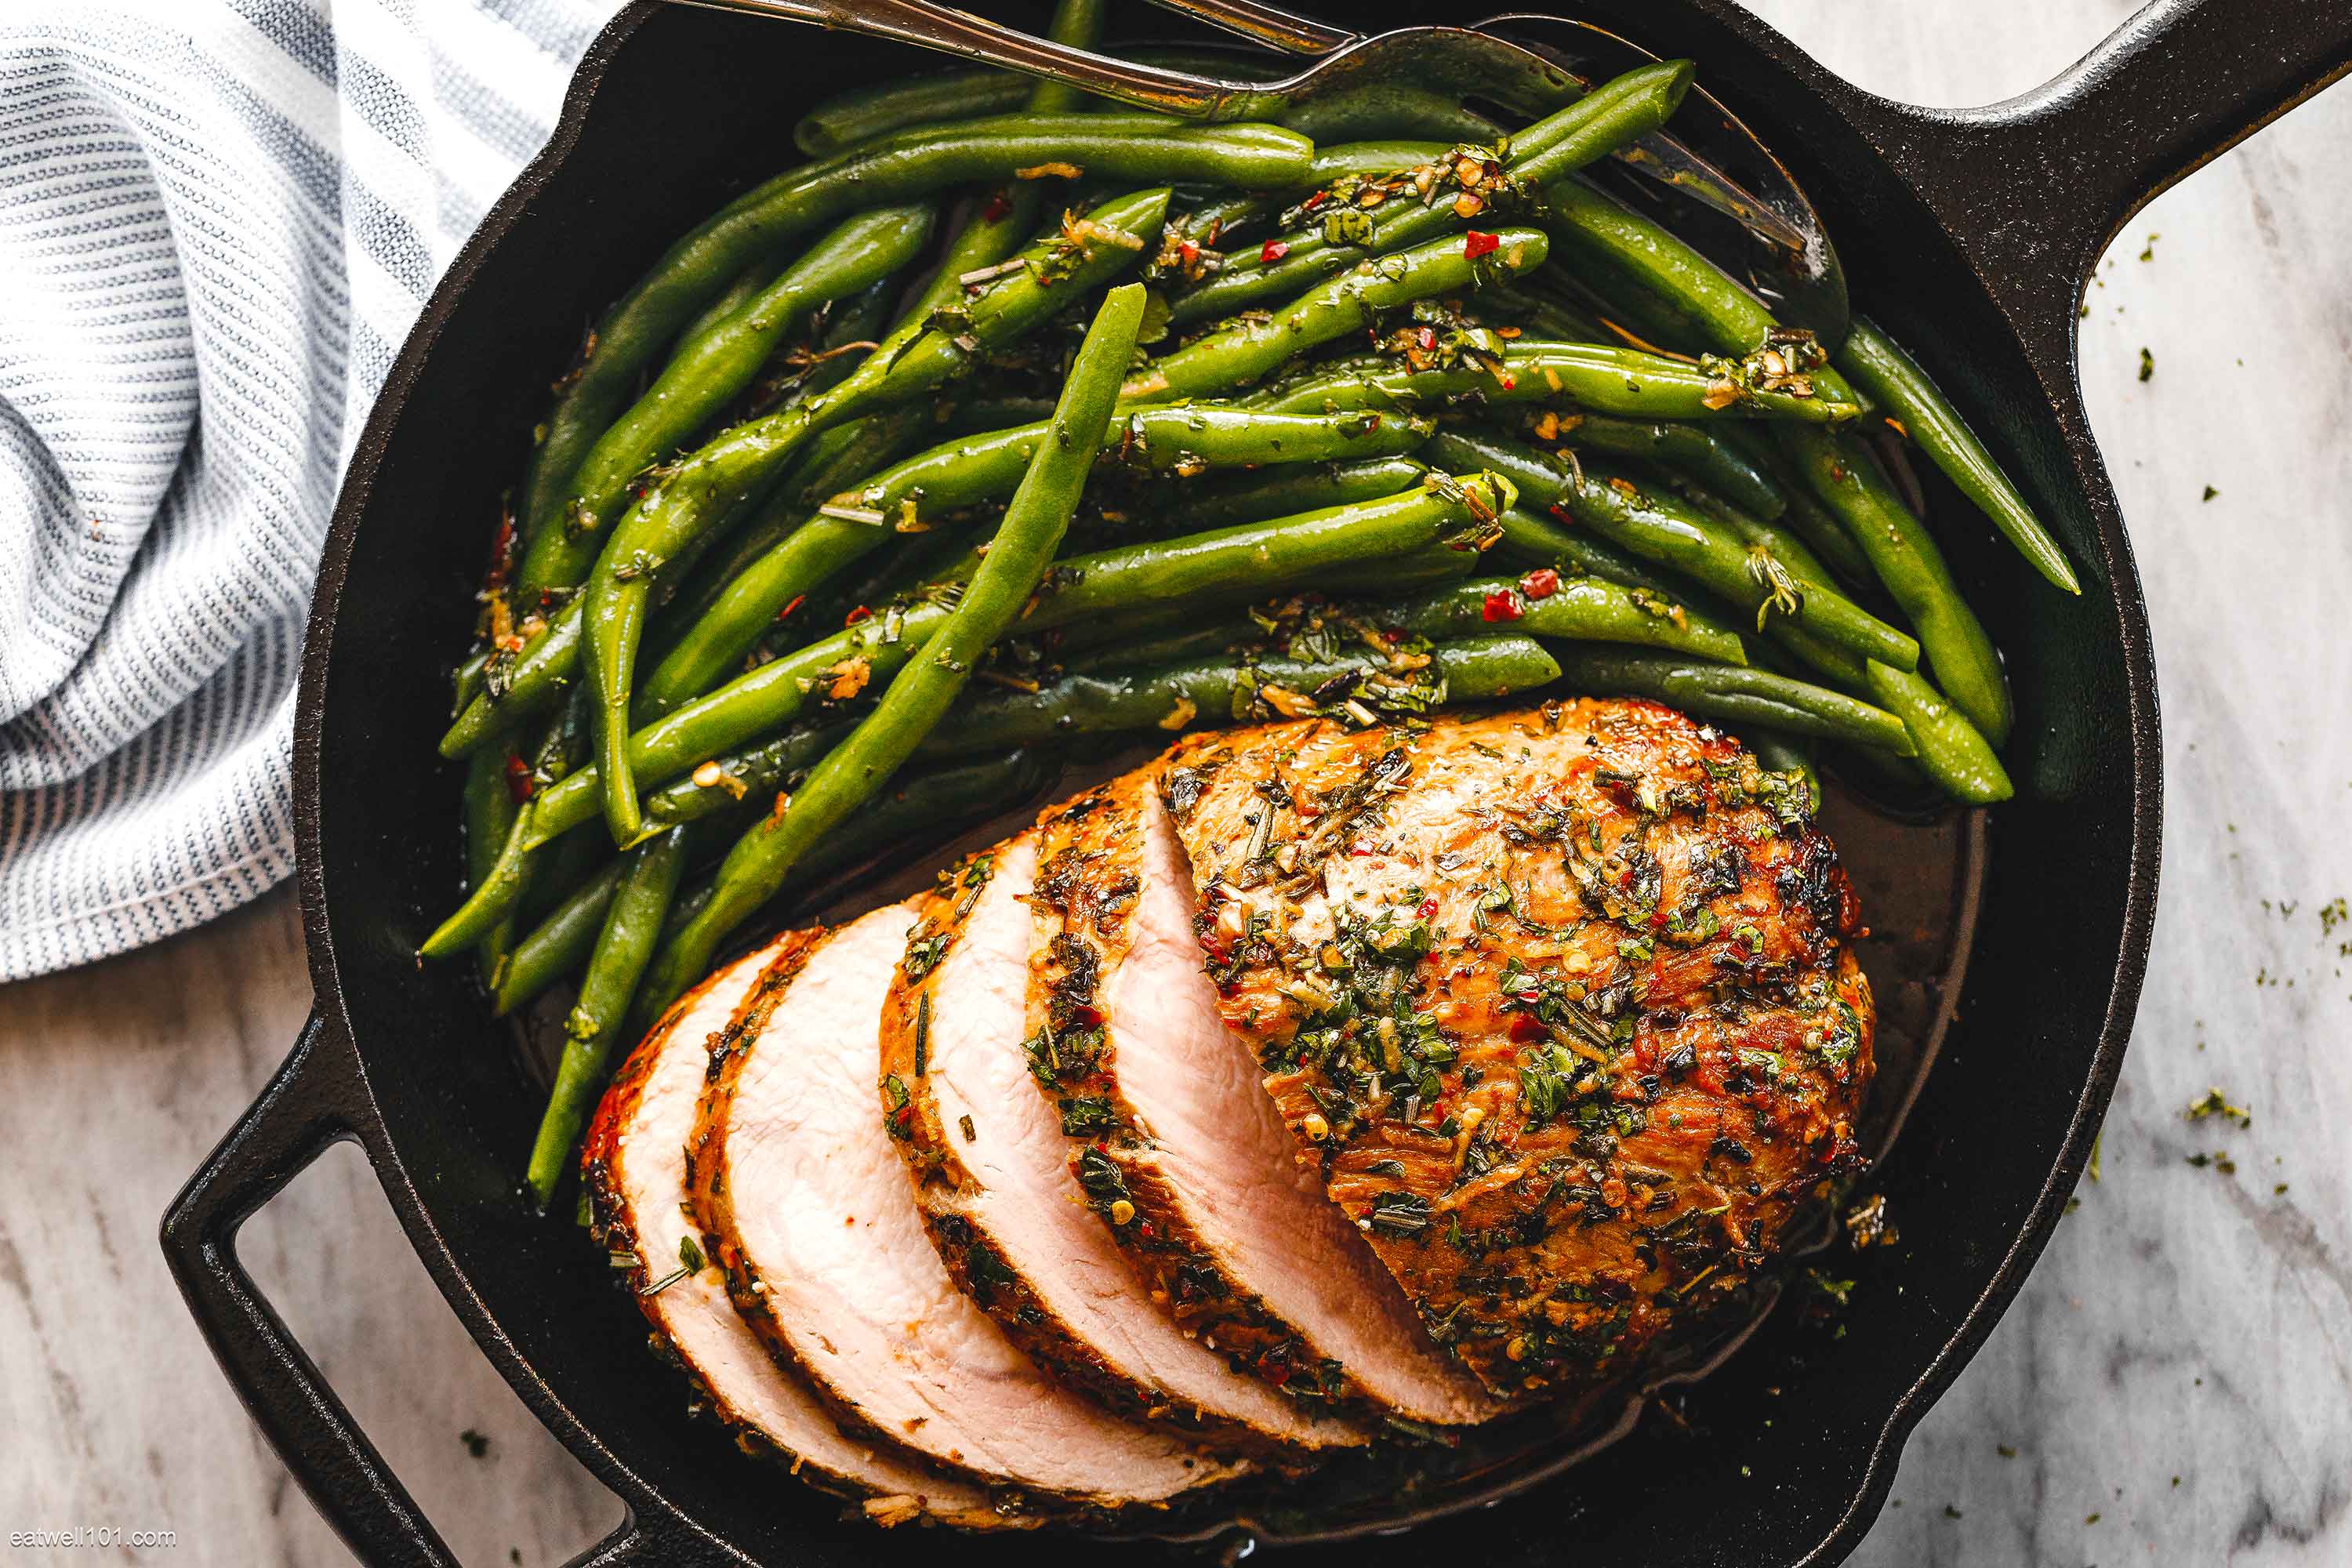 Roasted Pork Loin with Green Beans